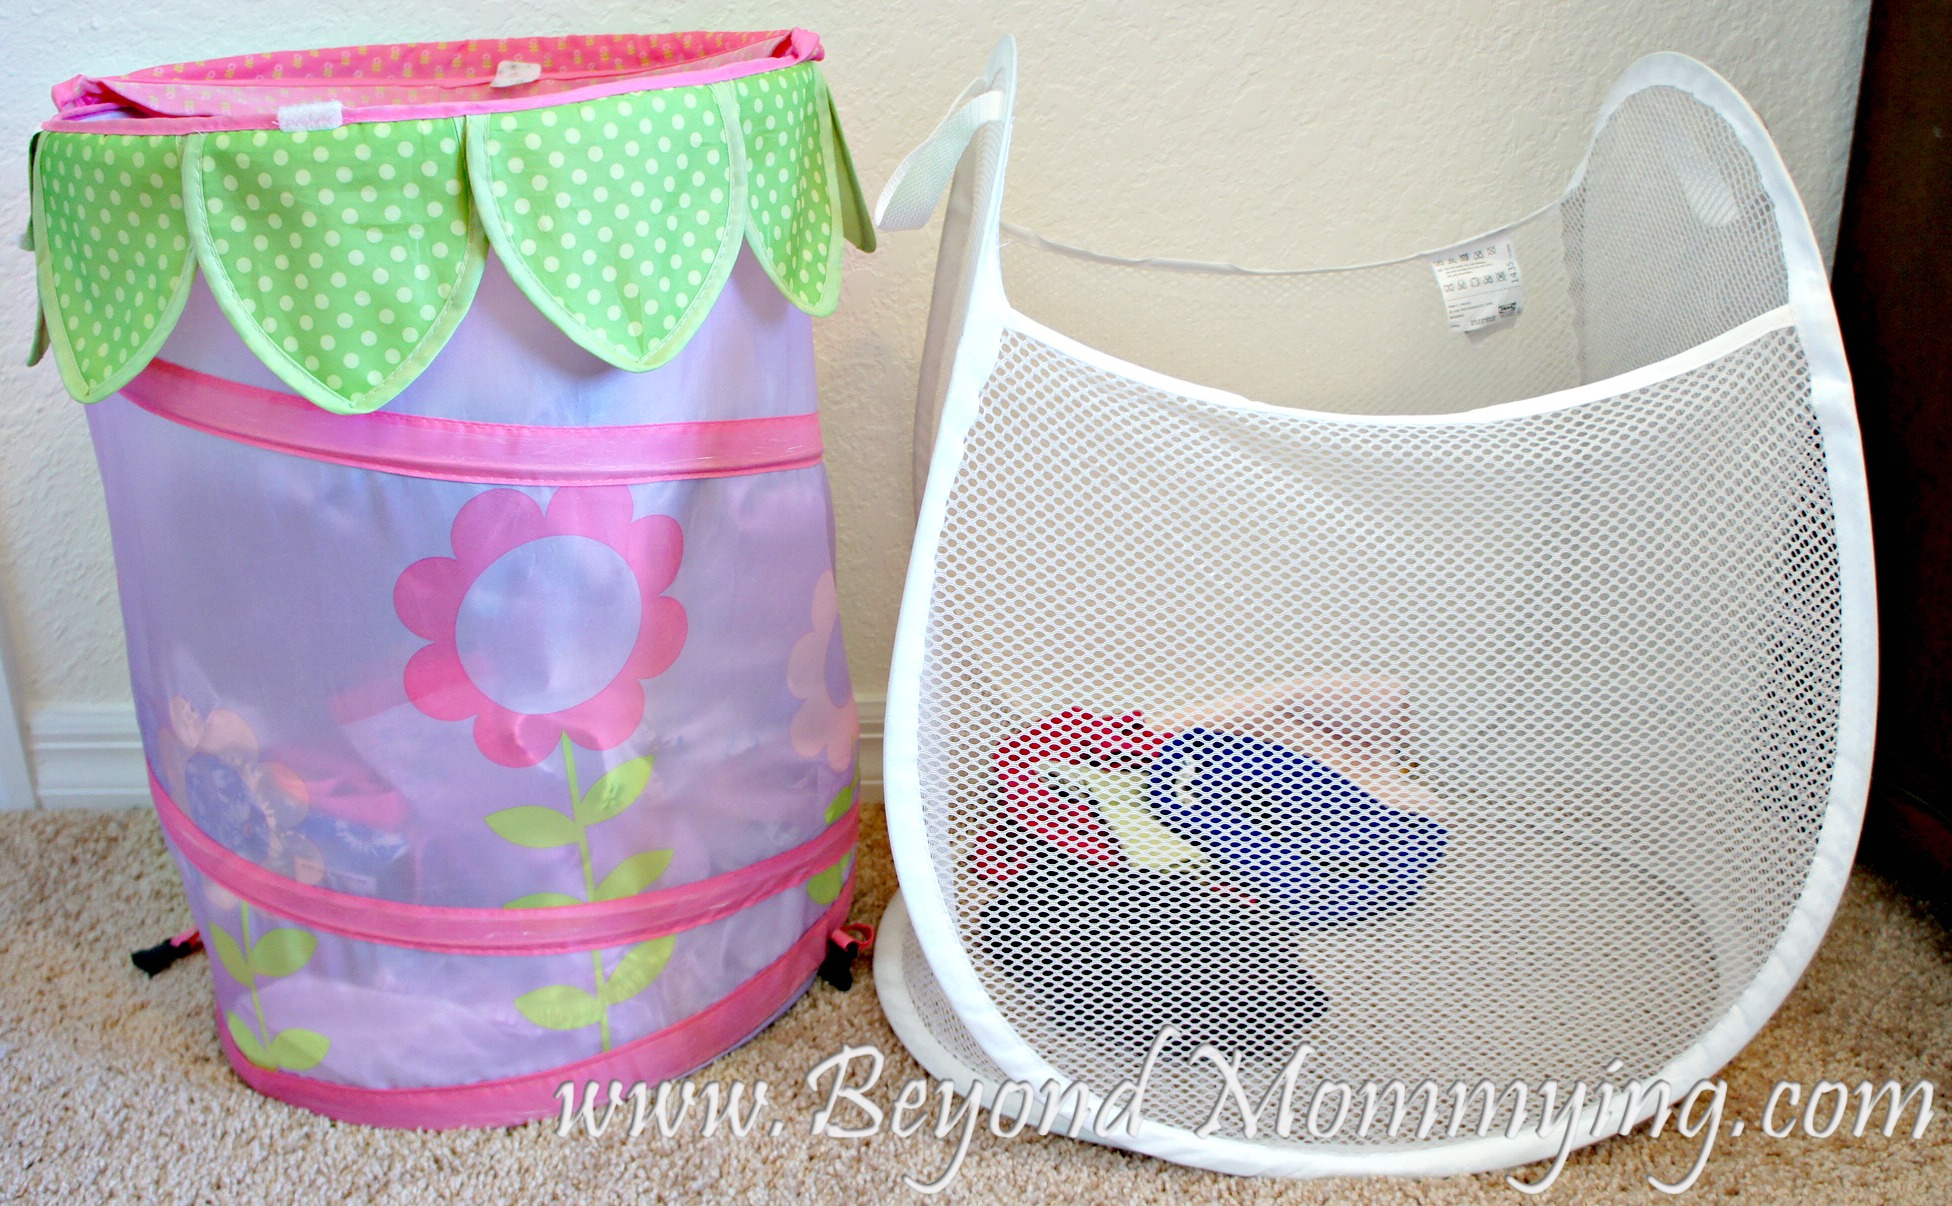 Using 2 baskets for kid's laundry: 1 for dirty and 1 for clean